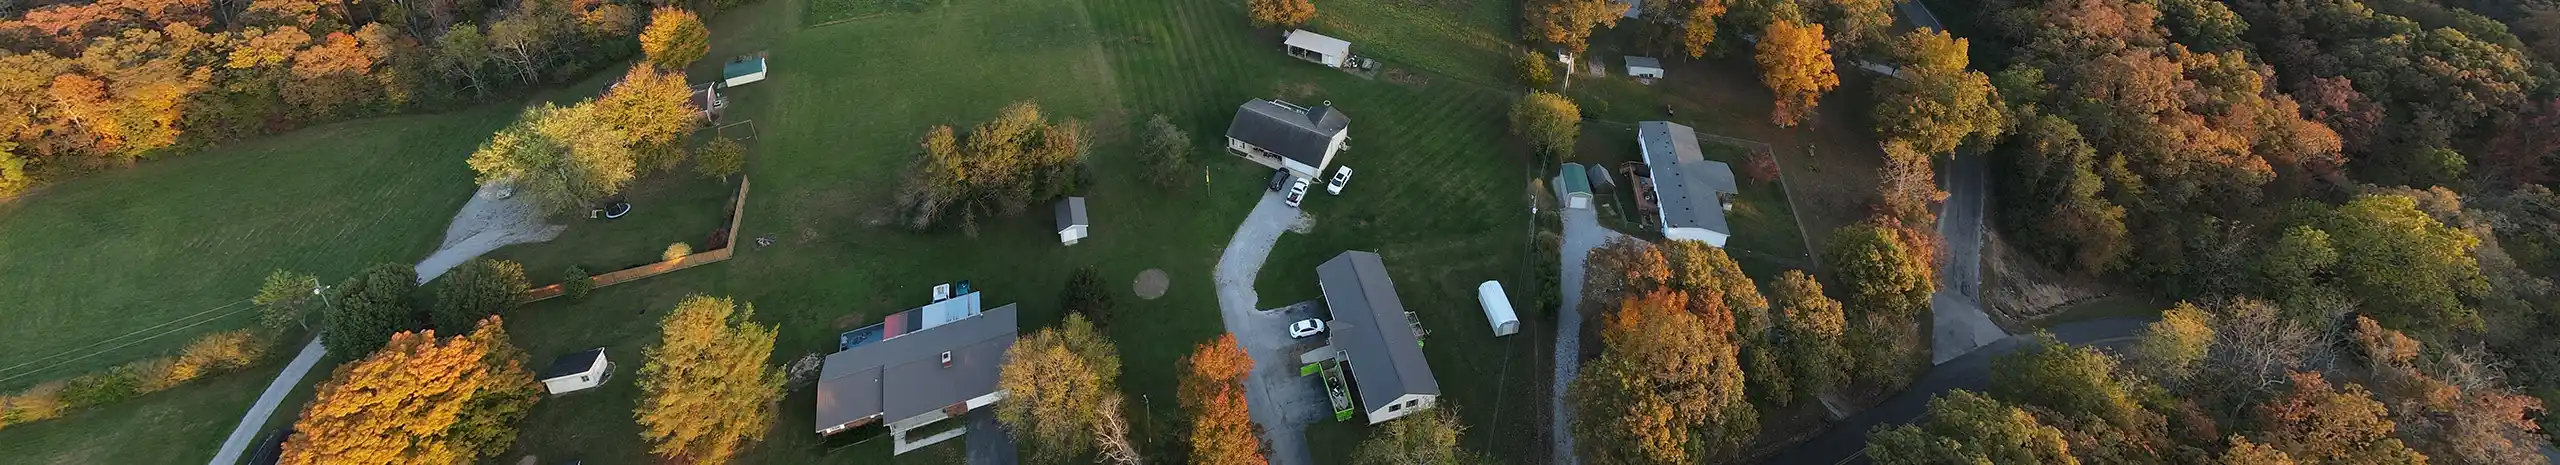 Overhead view of houses with land - Johnson Pest Control serving East Tennessee